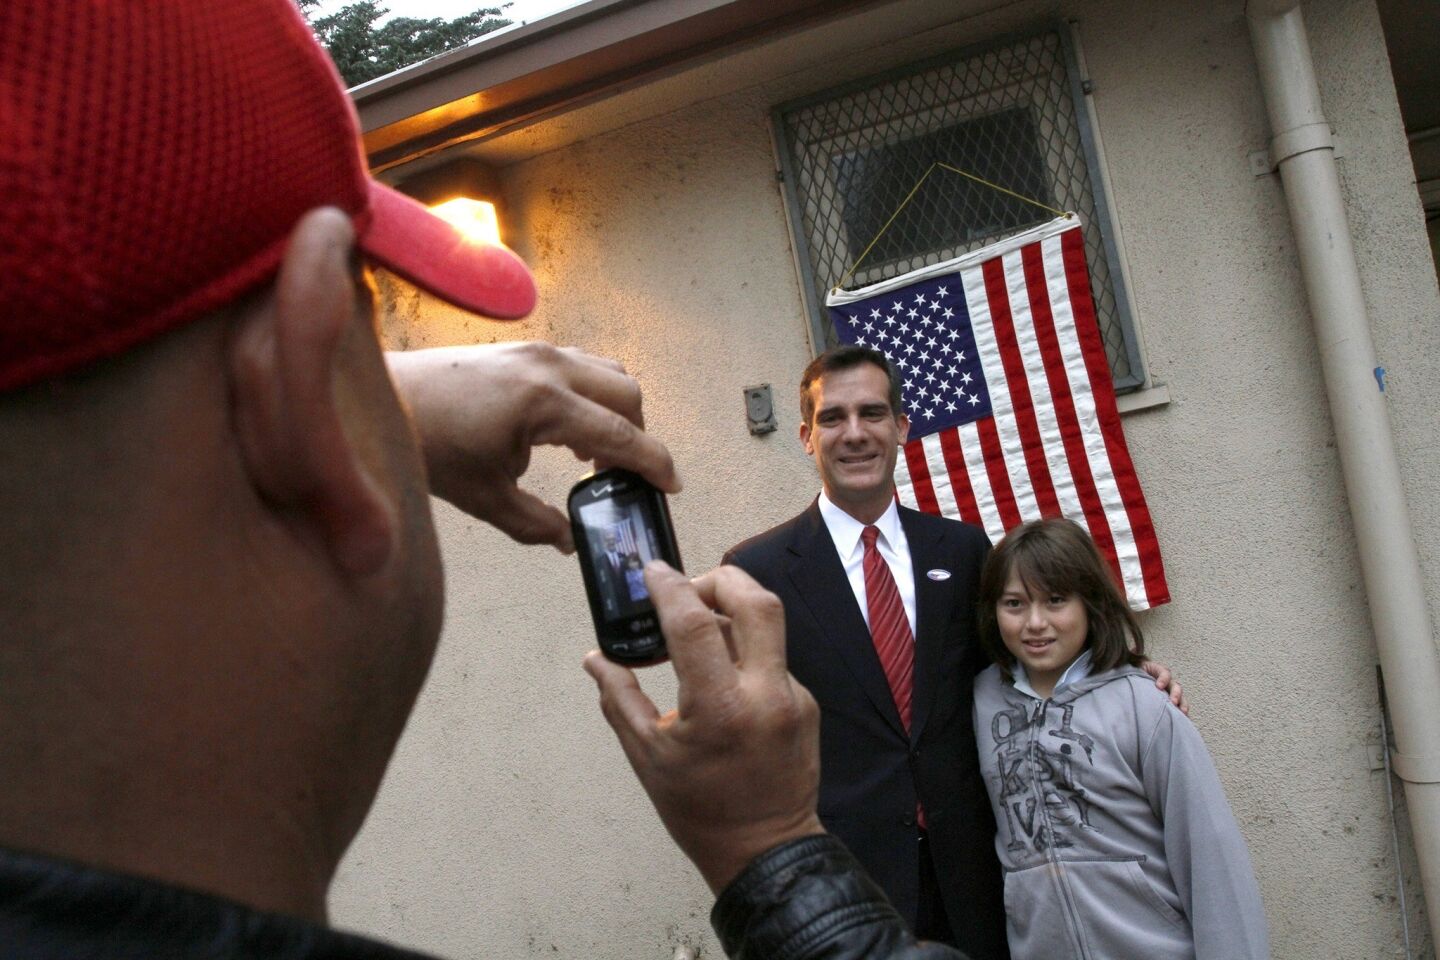 Carlos Lopez takes a photo of his 10-year-old son Kenneth with mayoral candidate Eric Garcetti at the polling station in Allesandro Elementary School in Silver Lake.